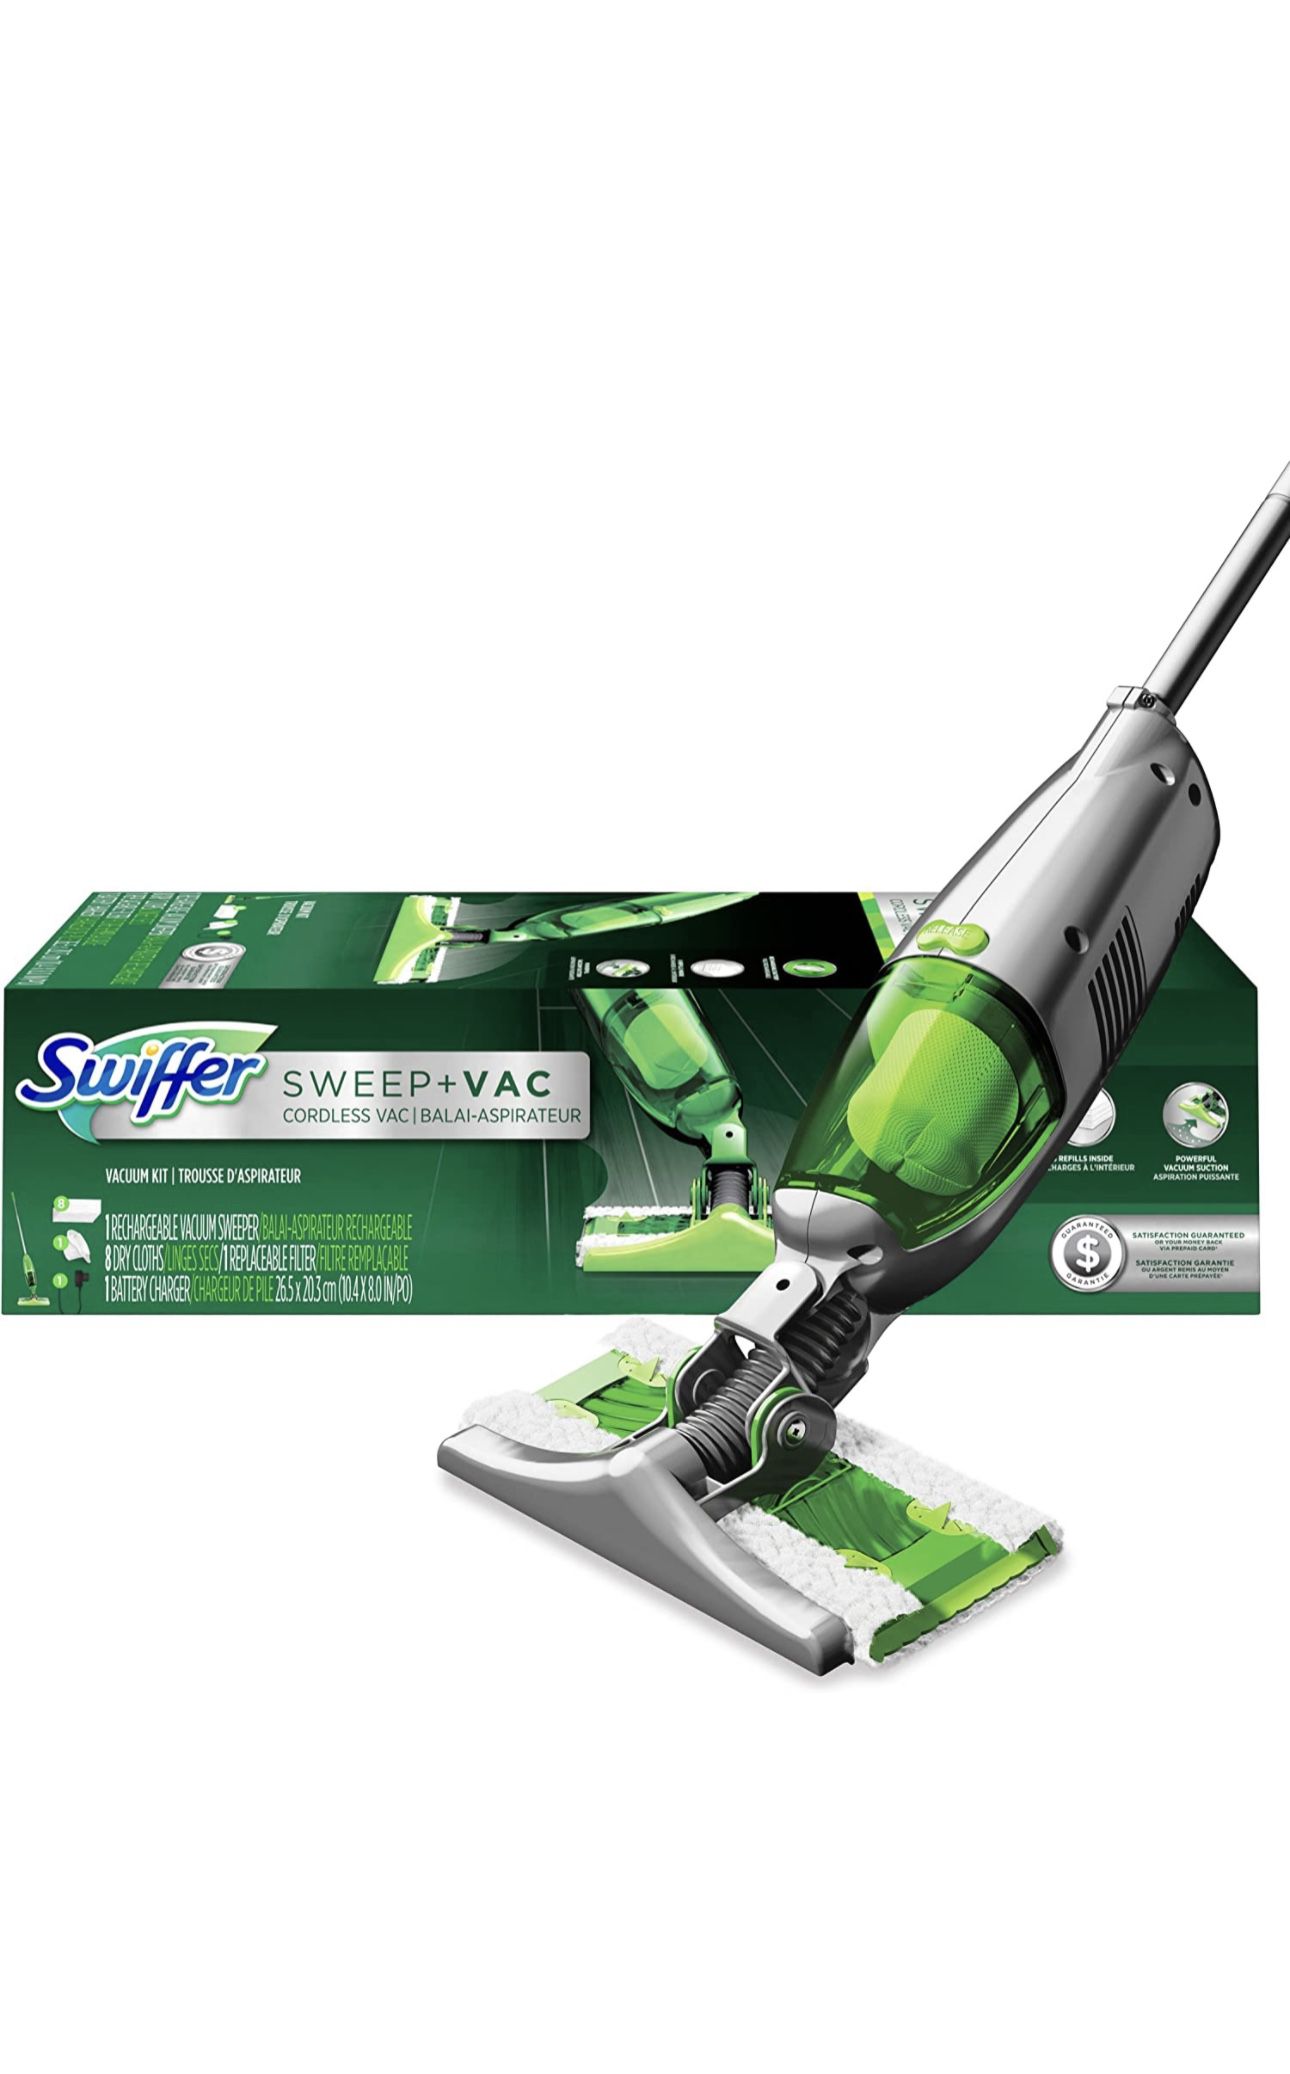 Swiffer Sweep and Vac Vacuum Cleaner for Floor: 